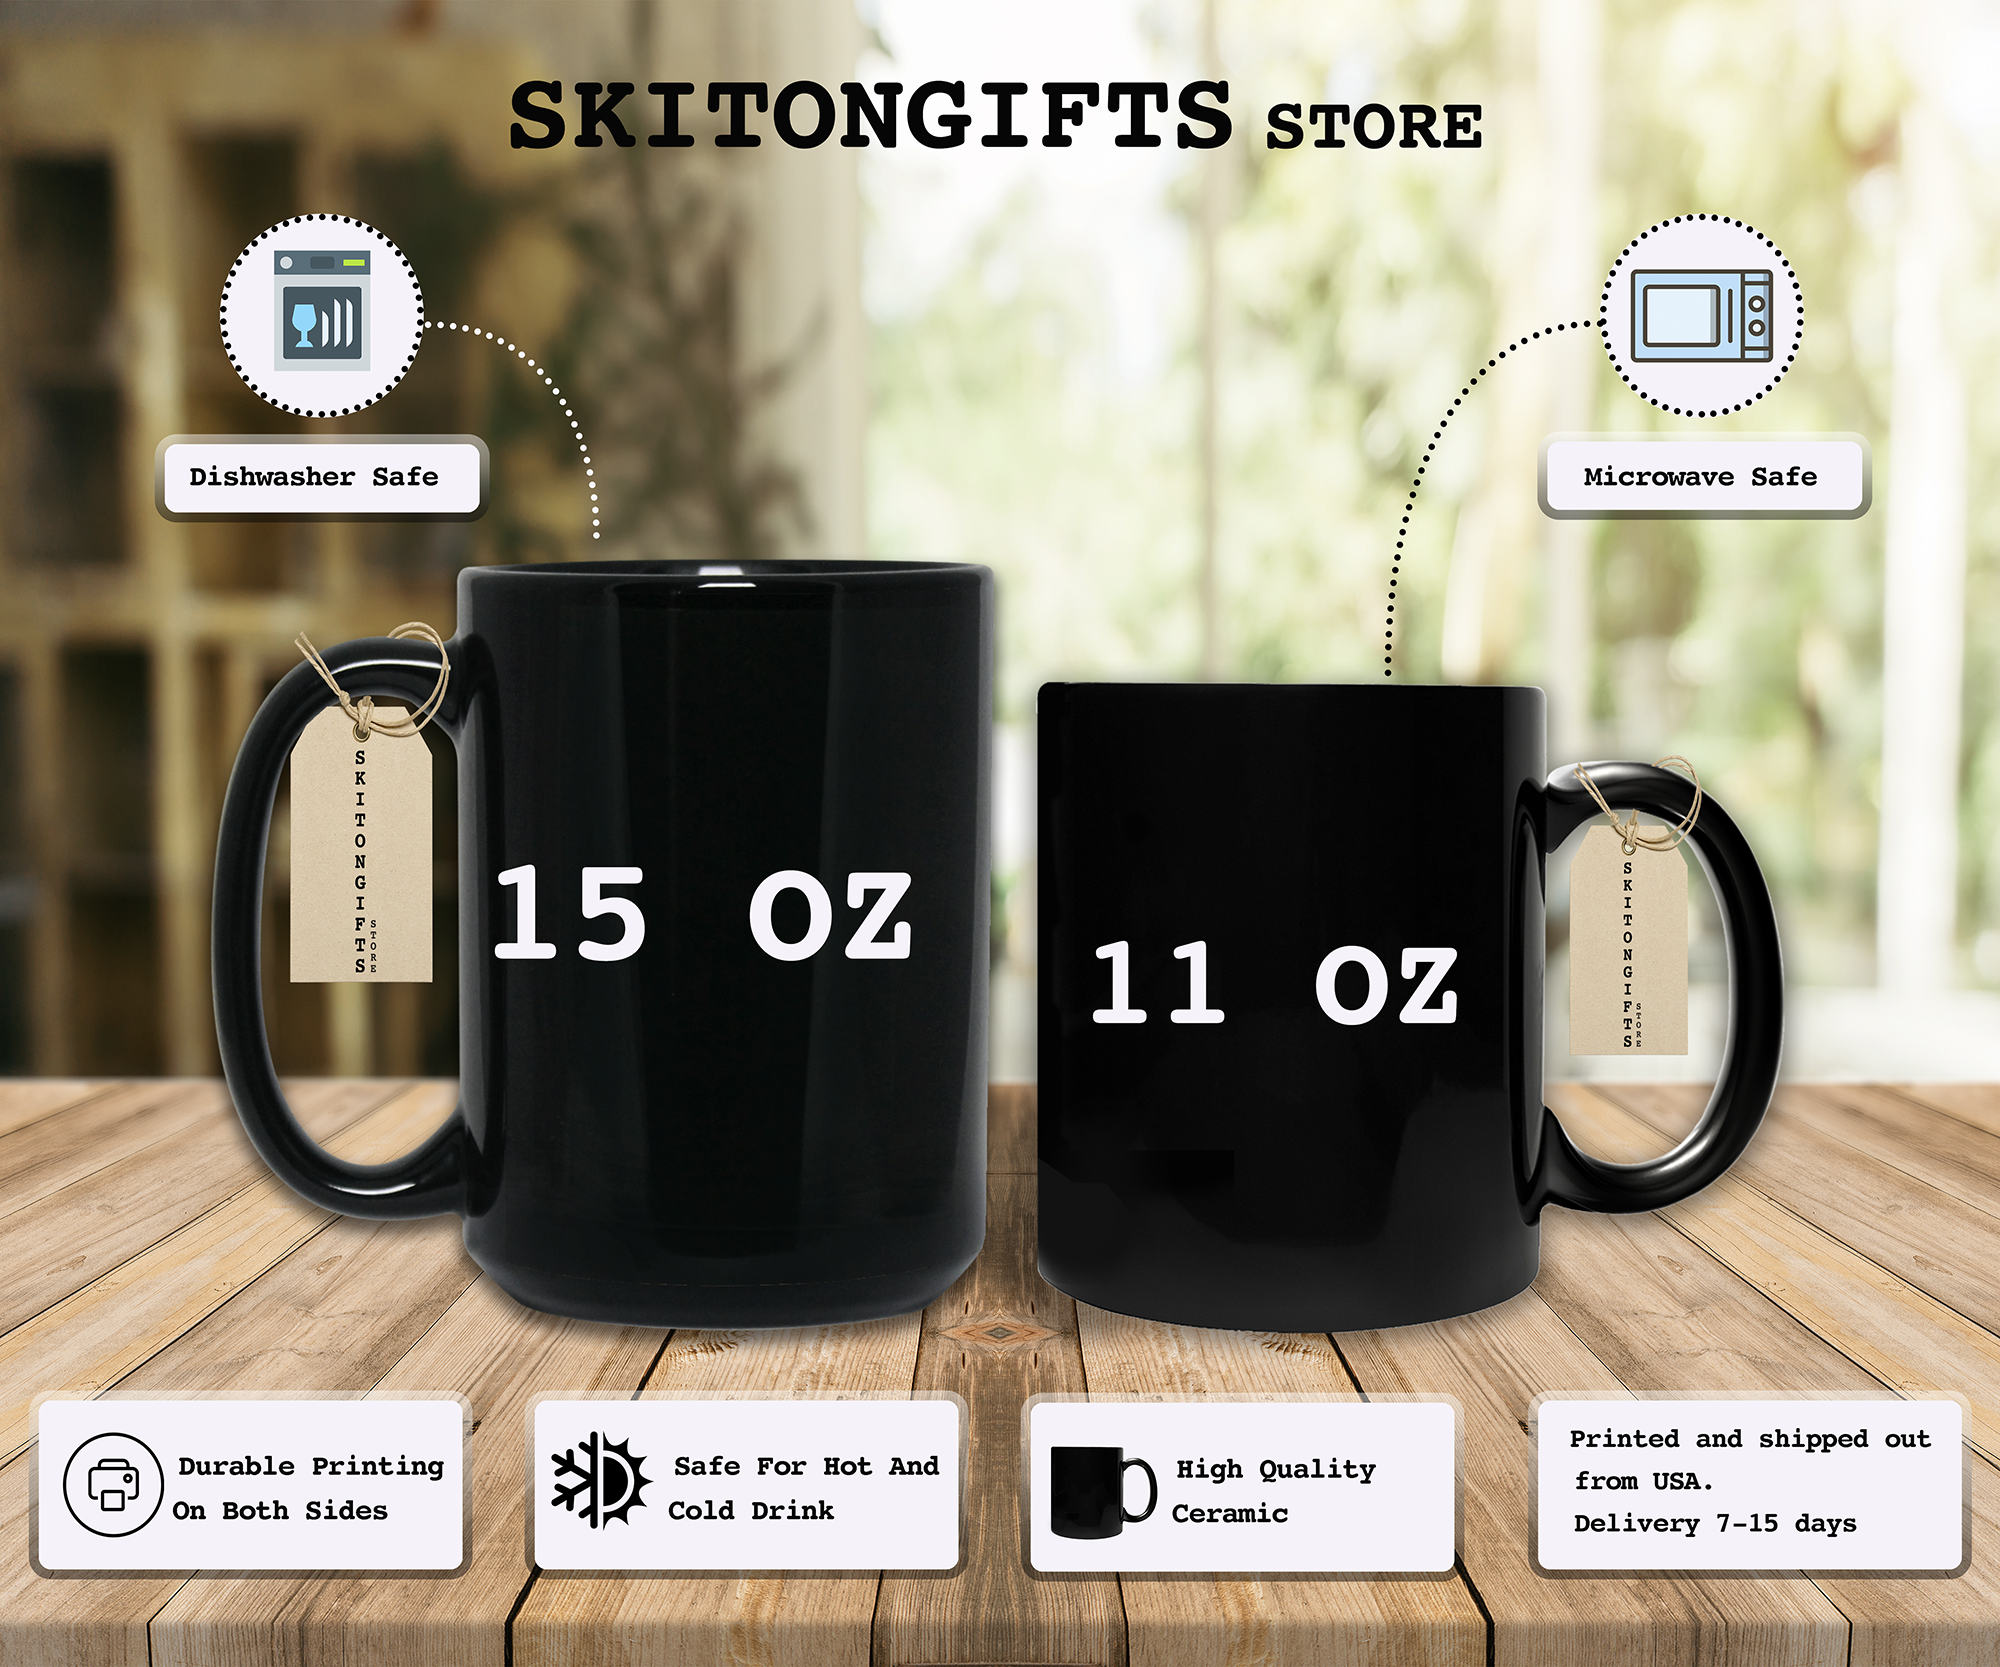 Skitongifts Funny Ceramic Novelty Coffee Mug You And I Are More Than Friens Like Small Gang Funny b20HRBt